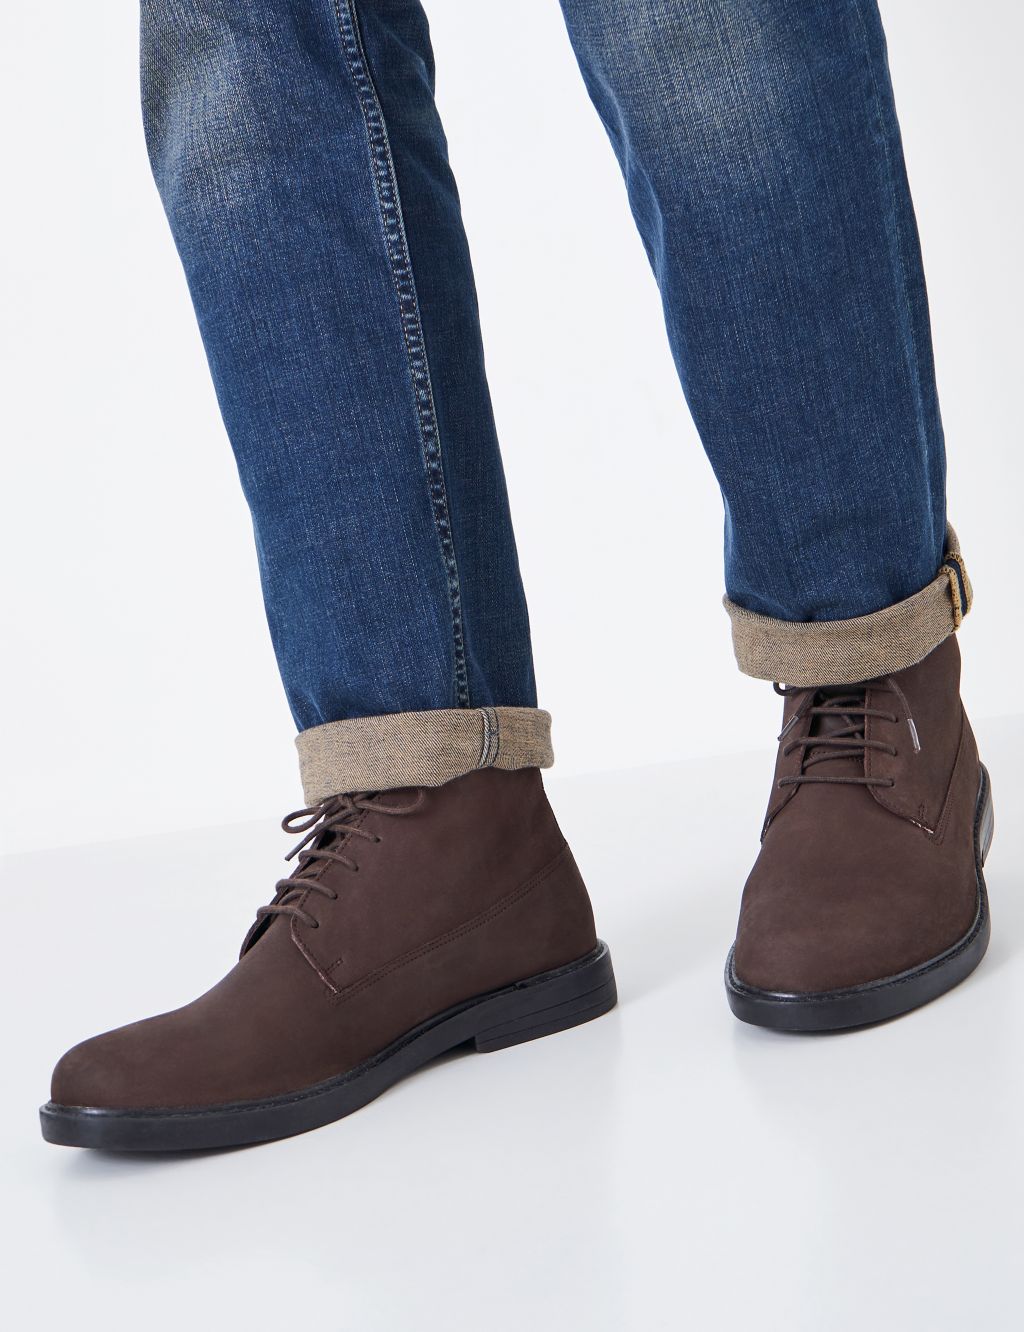 Leather Desert Boots image 3